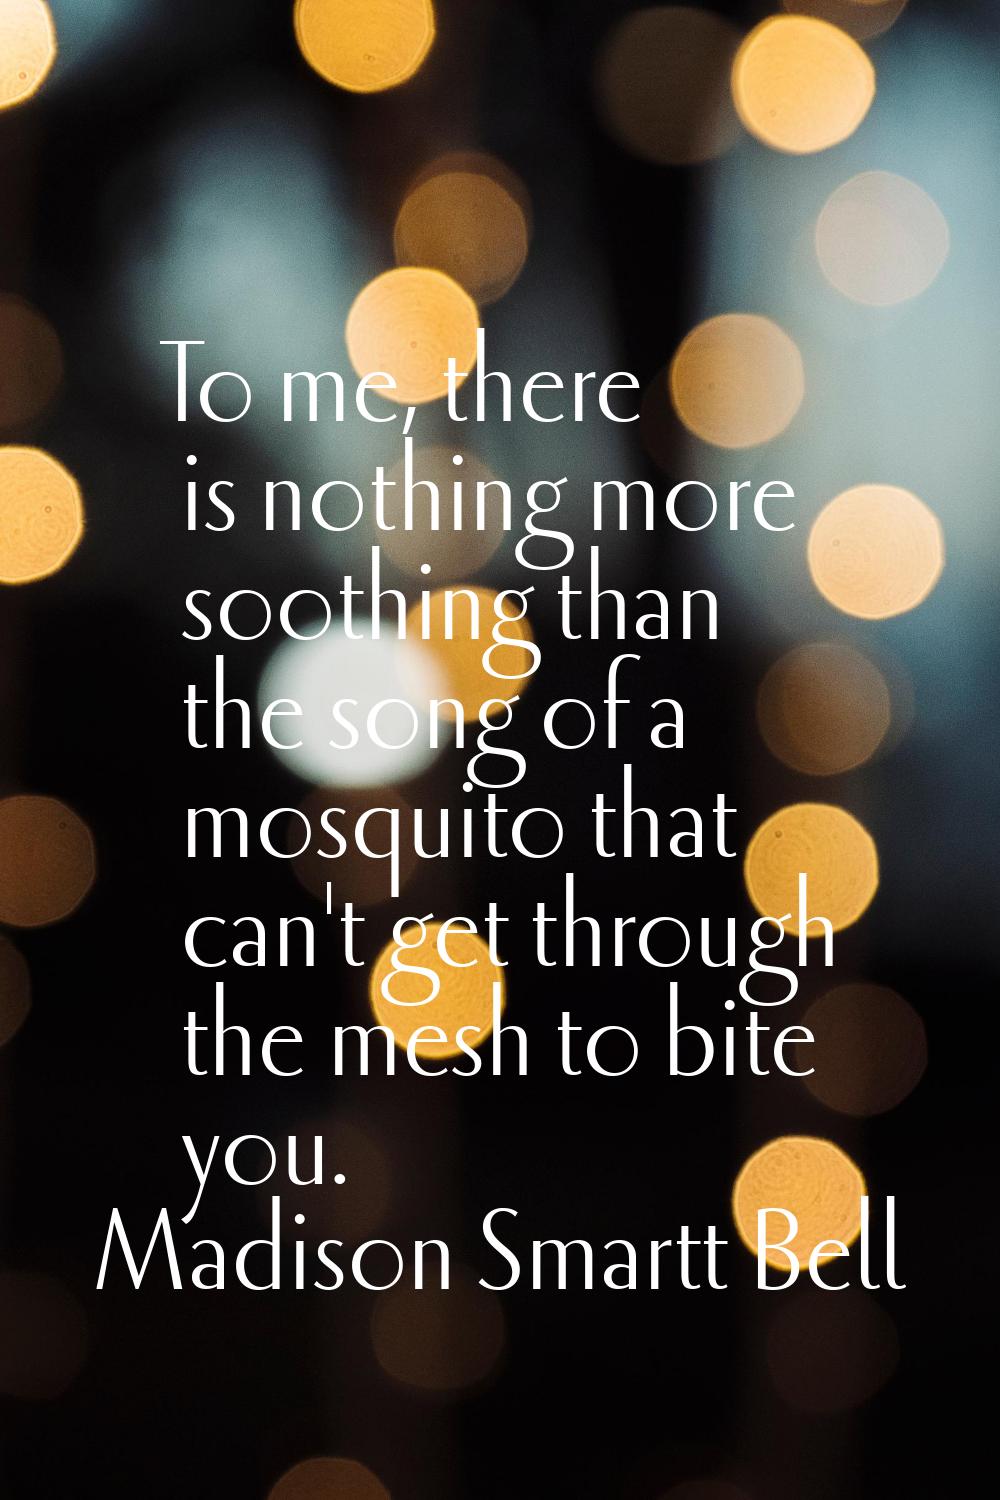 To me, there is nothing more soothing than the song of a mosquito that can't get through the mesh t